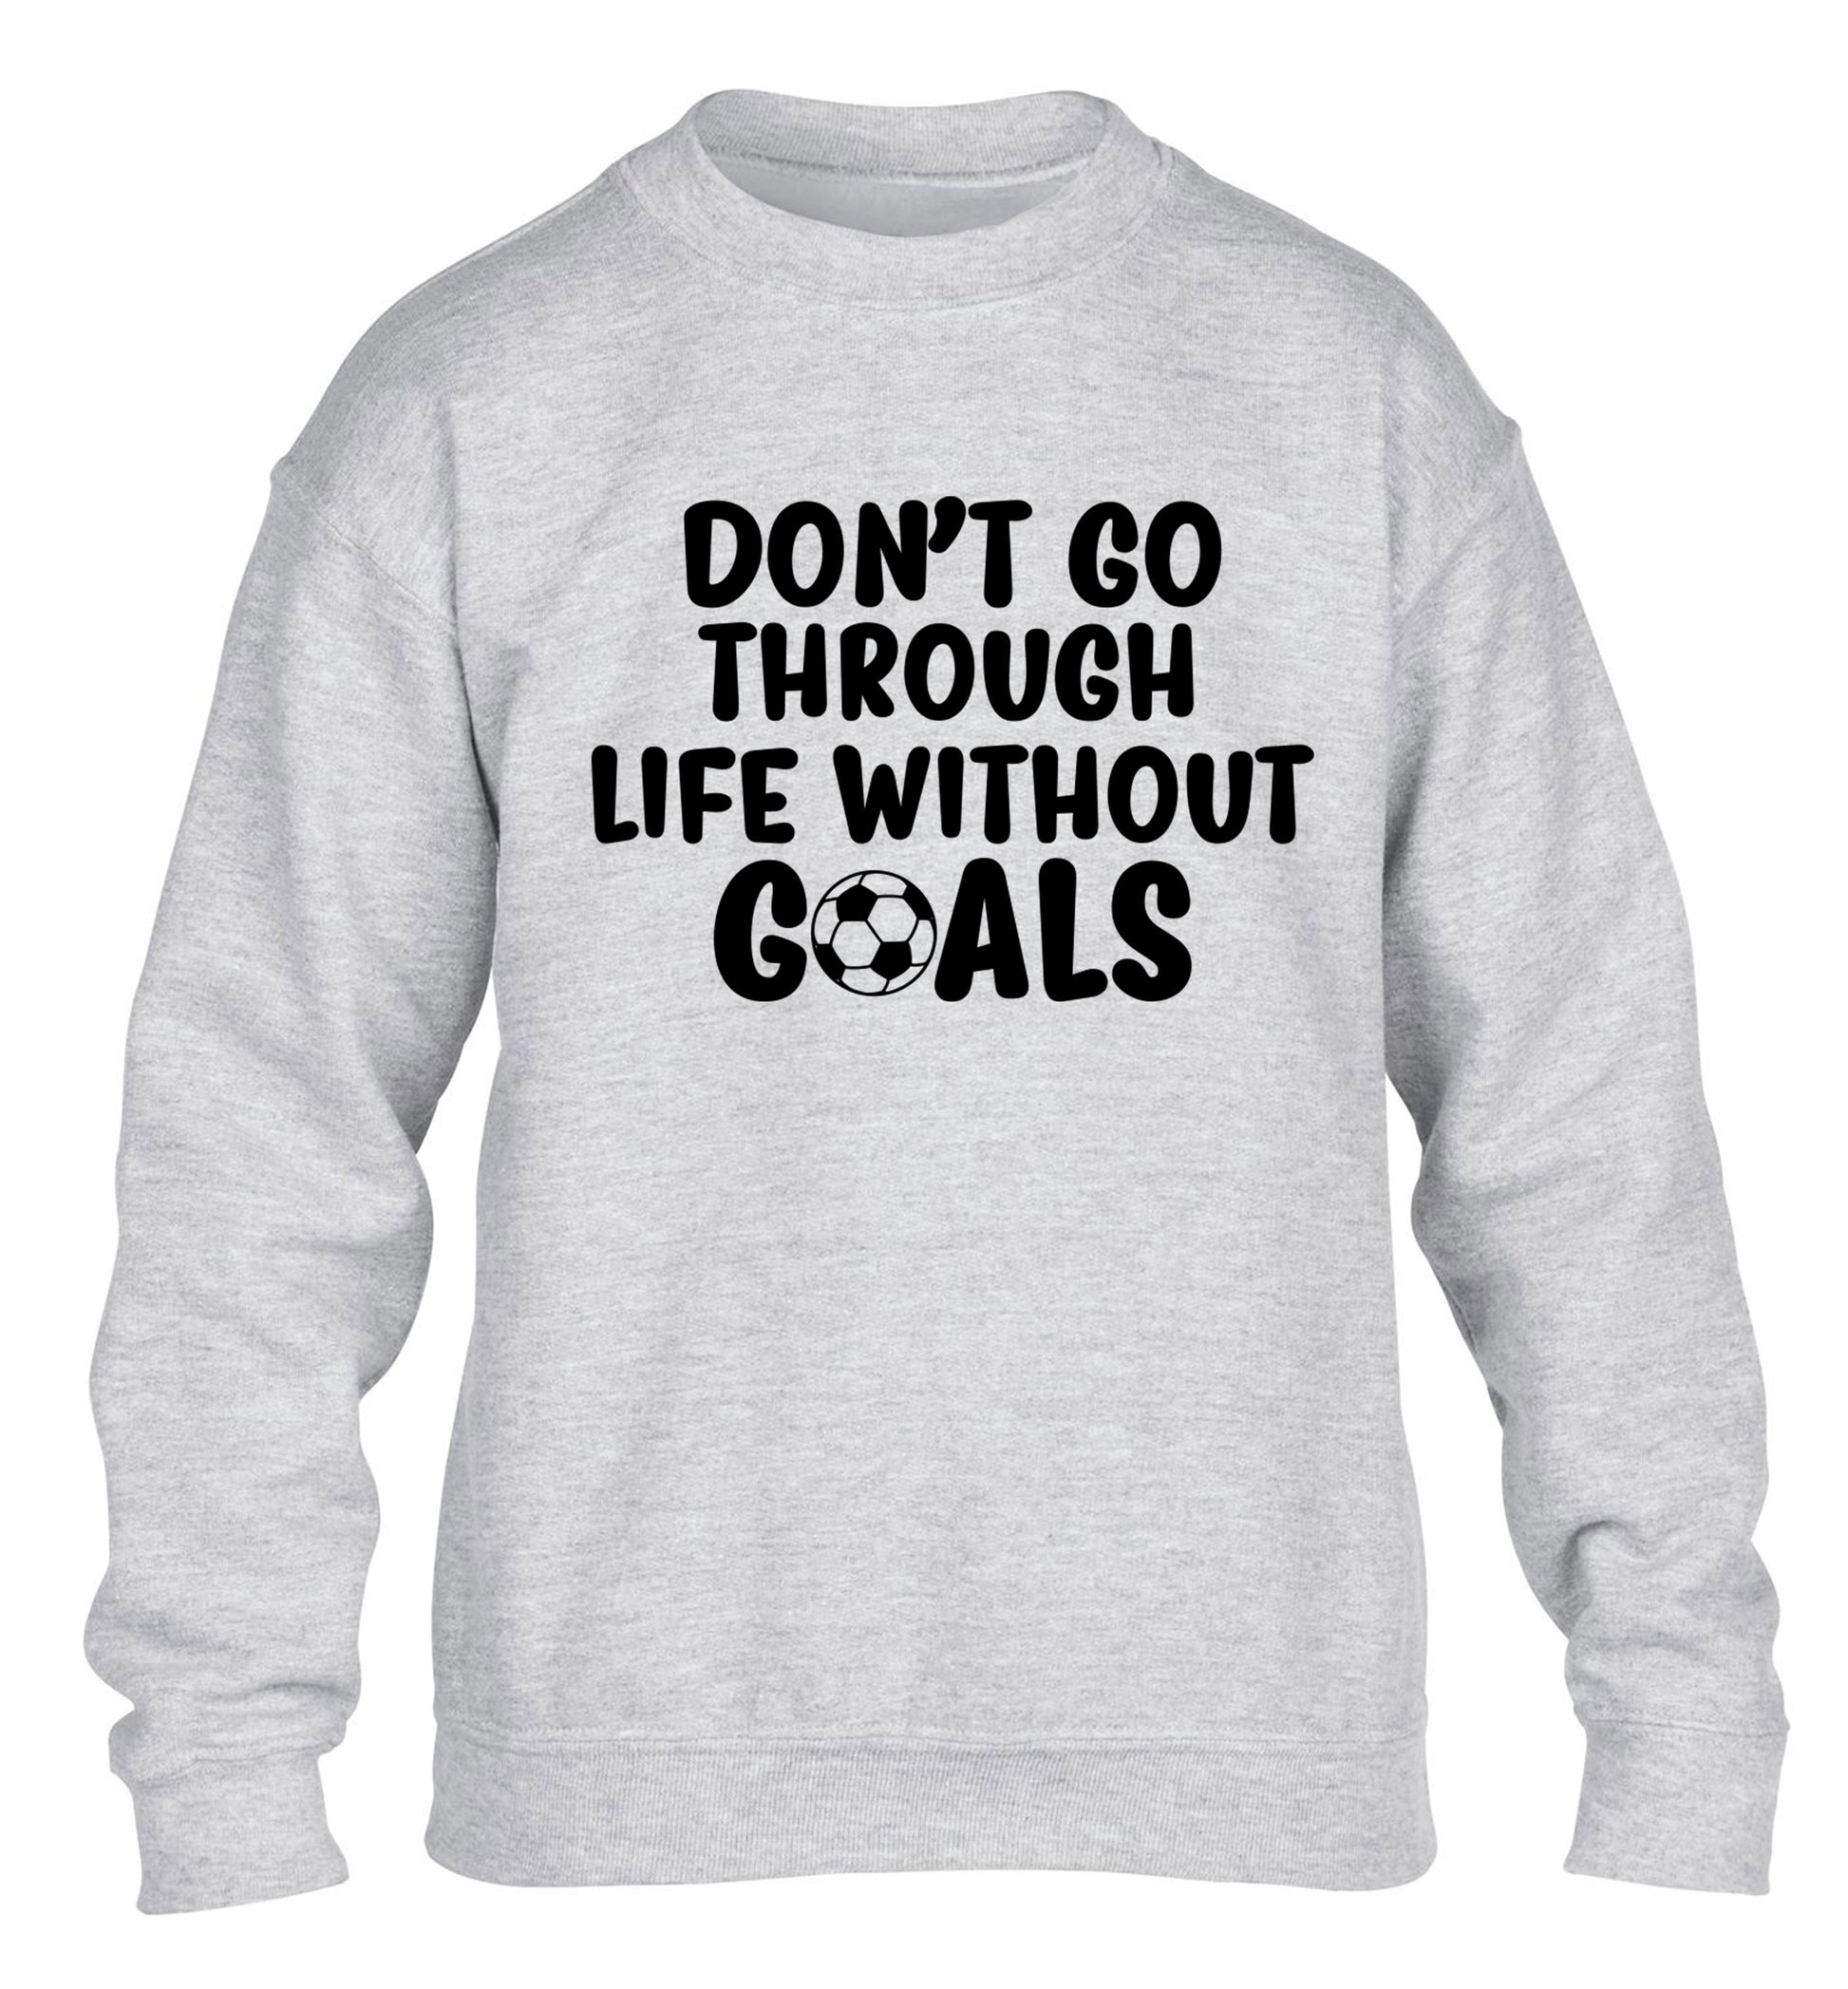 Don't go through life without goals children's grey sweater 12-14 Years